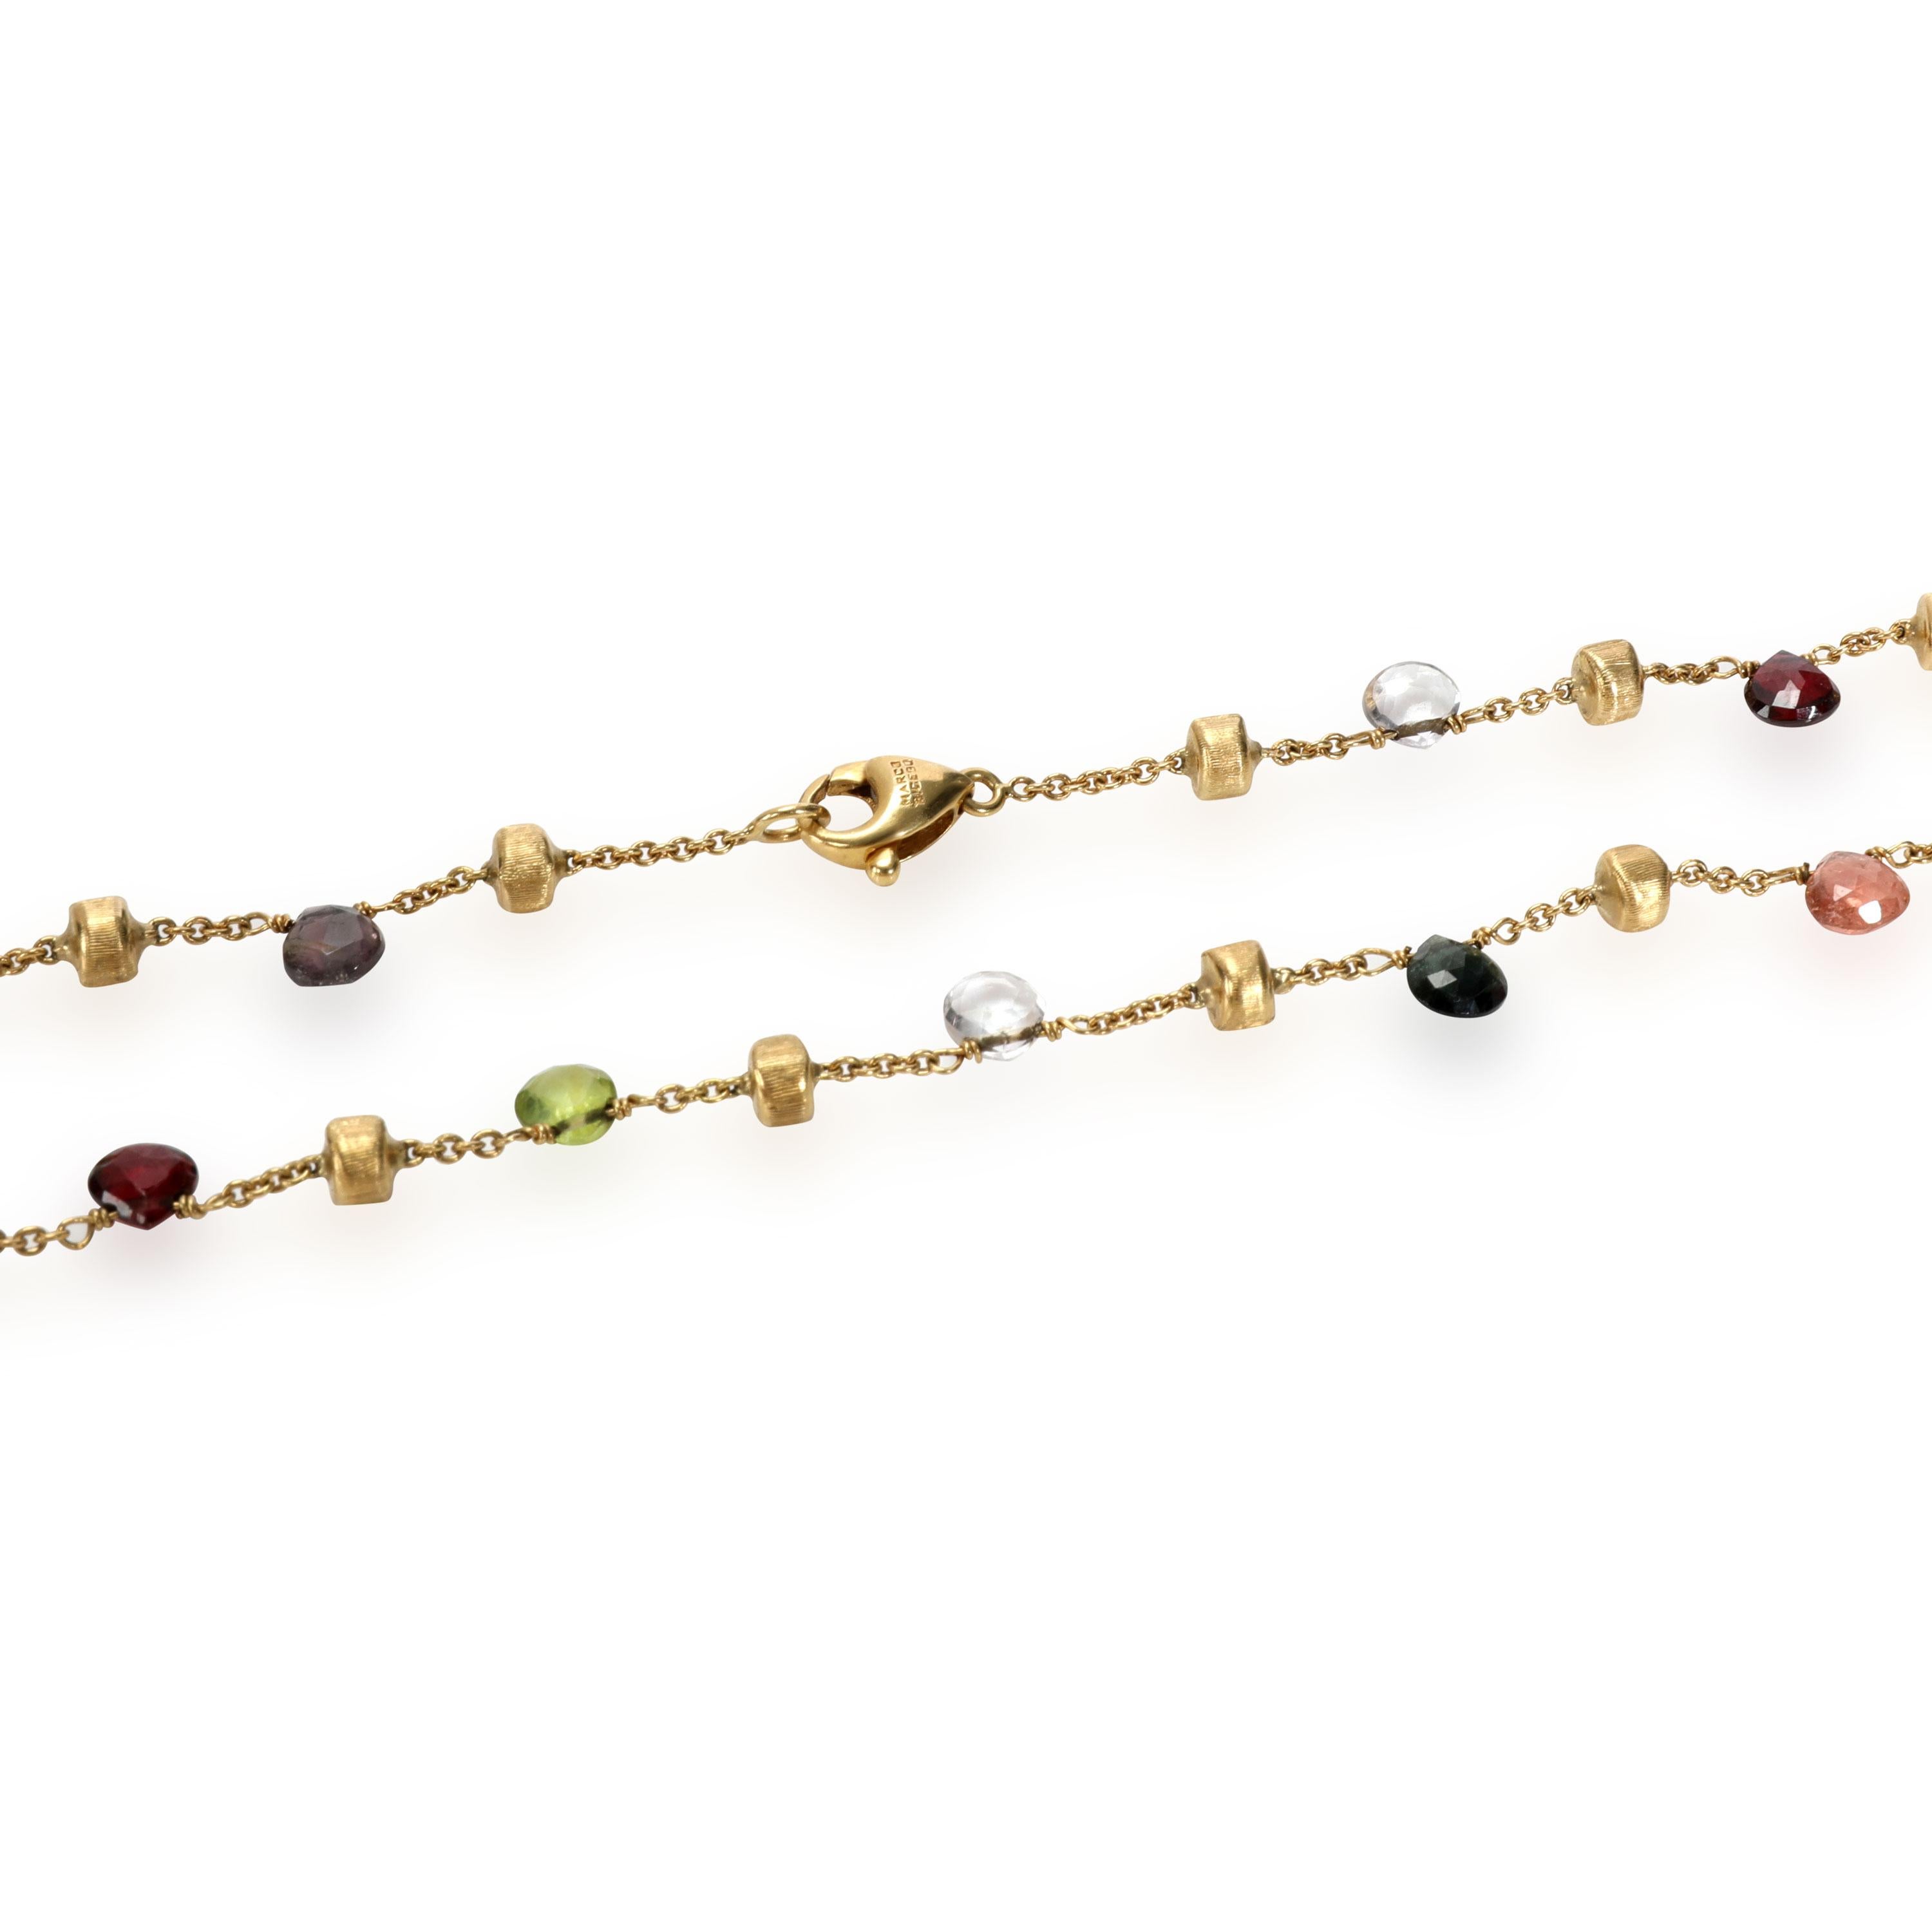 Modern Marco Bicego Paradise Mix Gemstone Necklace in 18K Yellow Gold